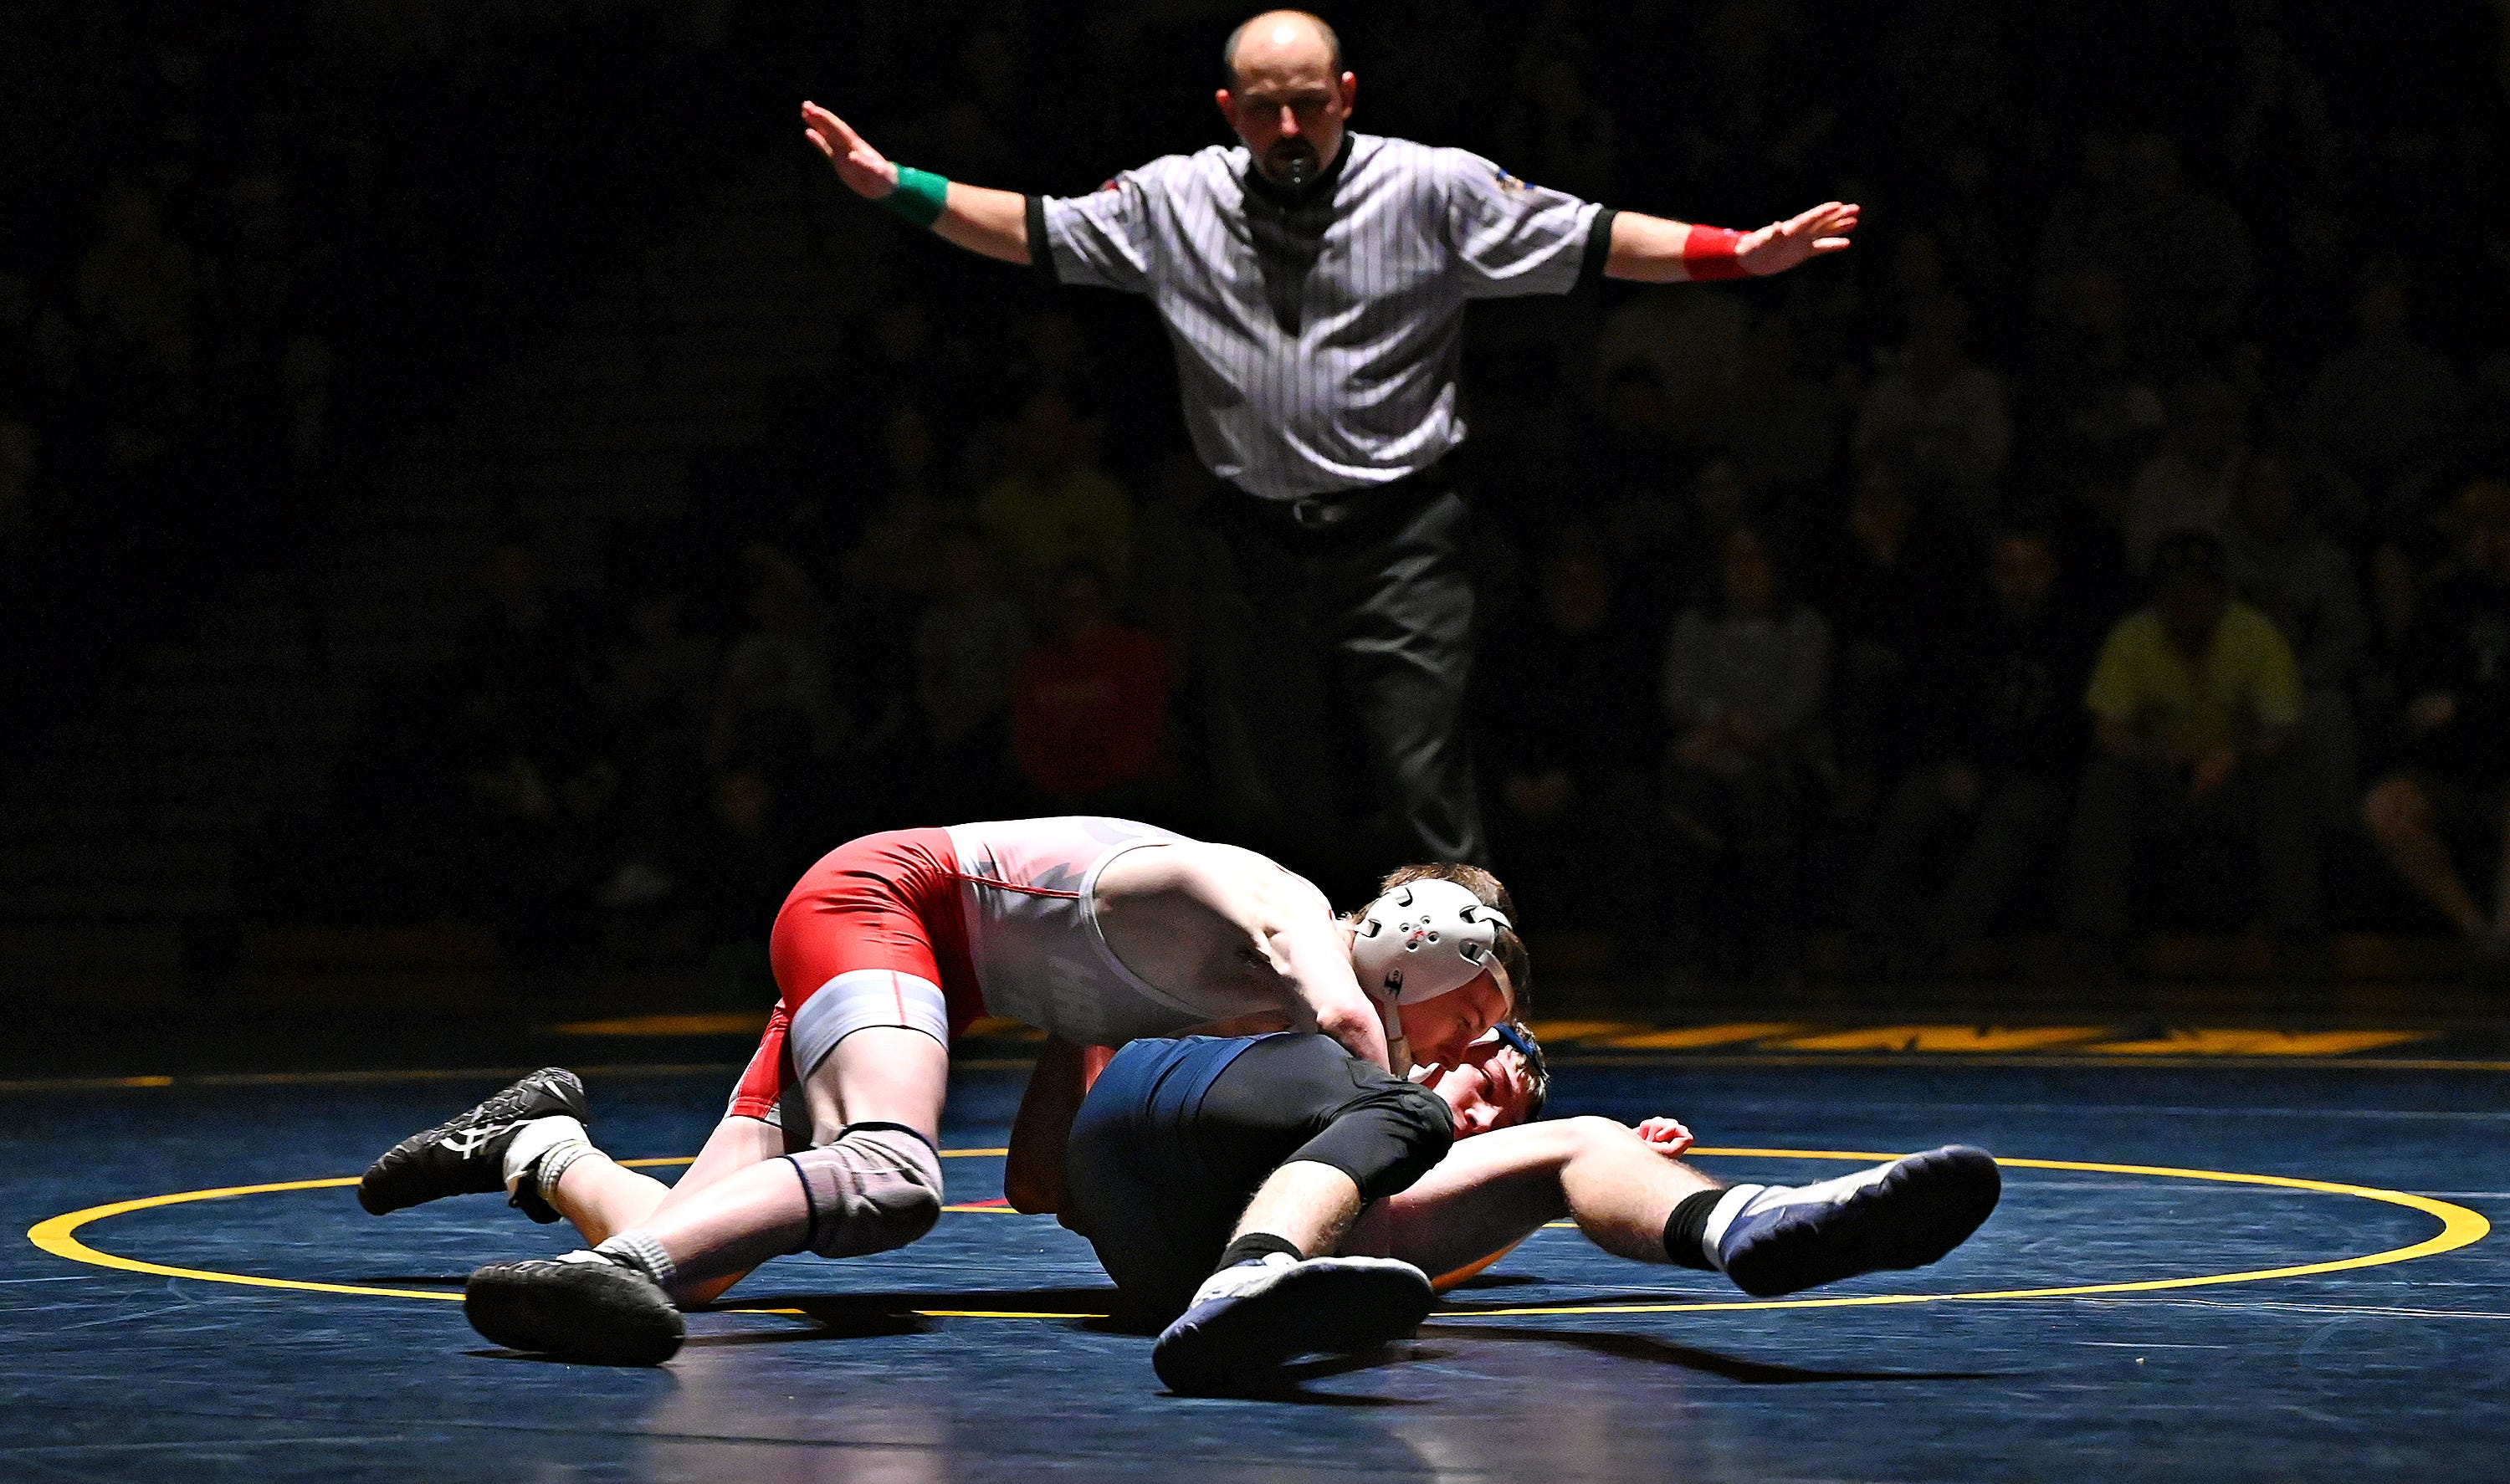 Eastern York’s Blake Summerson, right, and Hamburg’s Chase Homan compete in the 121-pound weight class during PIAA District 3, Class 2-A first round wrestling action at Eastern York High School in Lower Windsor Township, Monday, Jan. 30, 2023. Homan would win the match and Eastern York would win the meet 50-22. Dawn J. Sagert photo